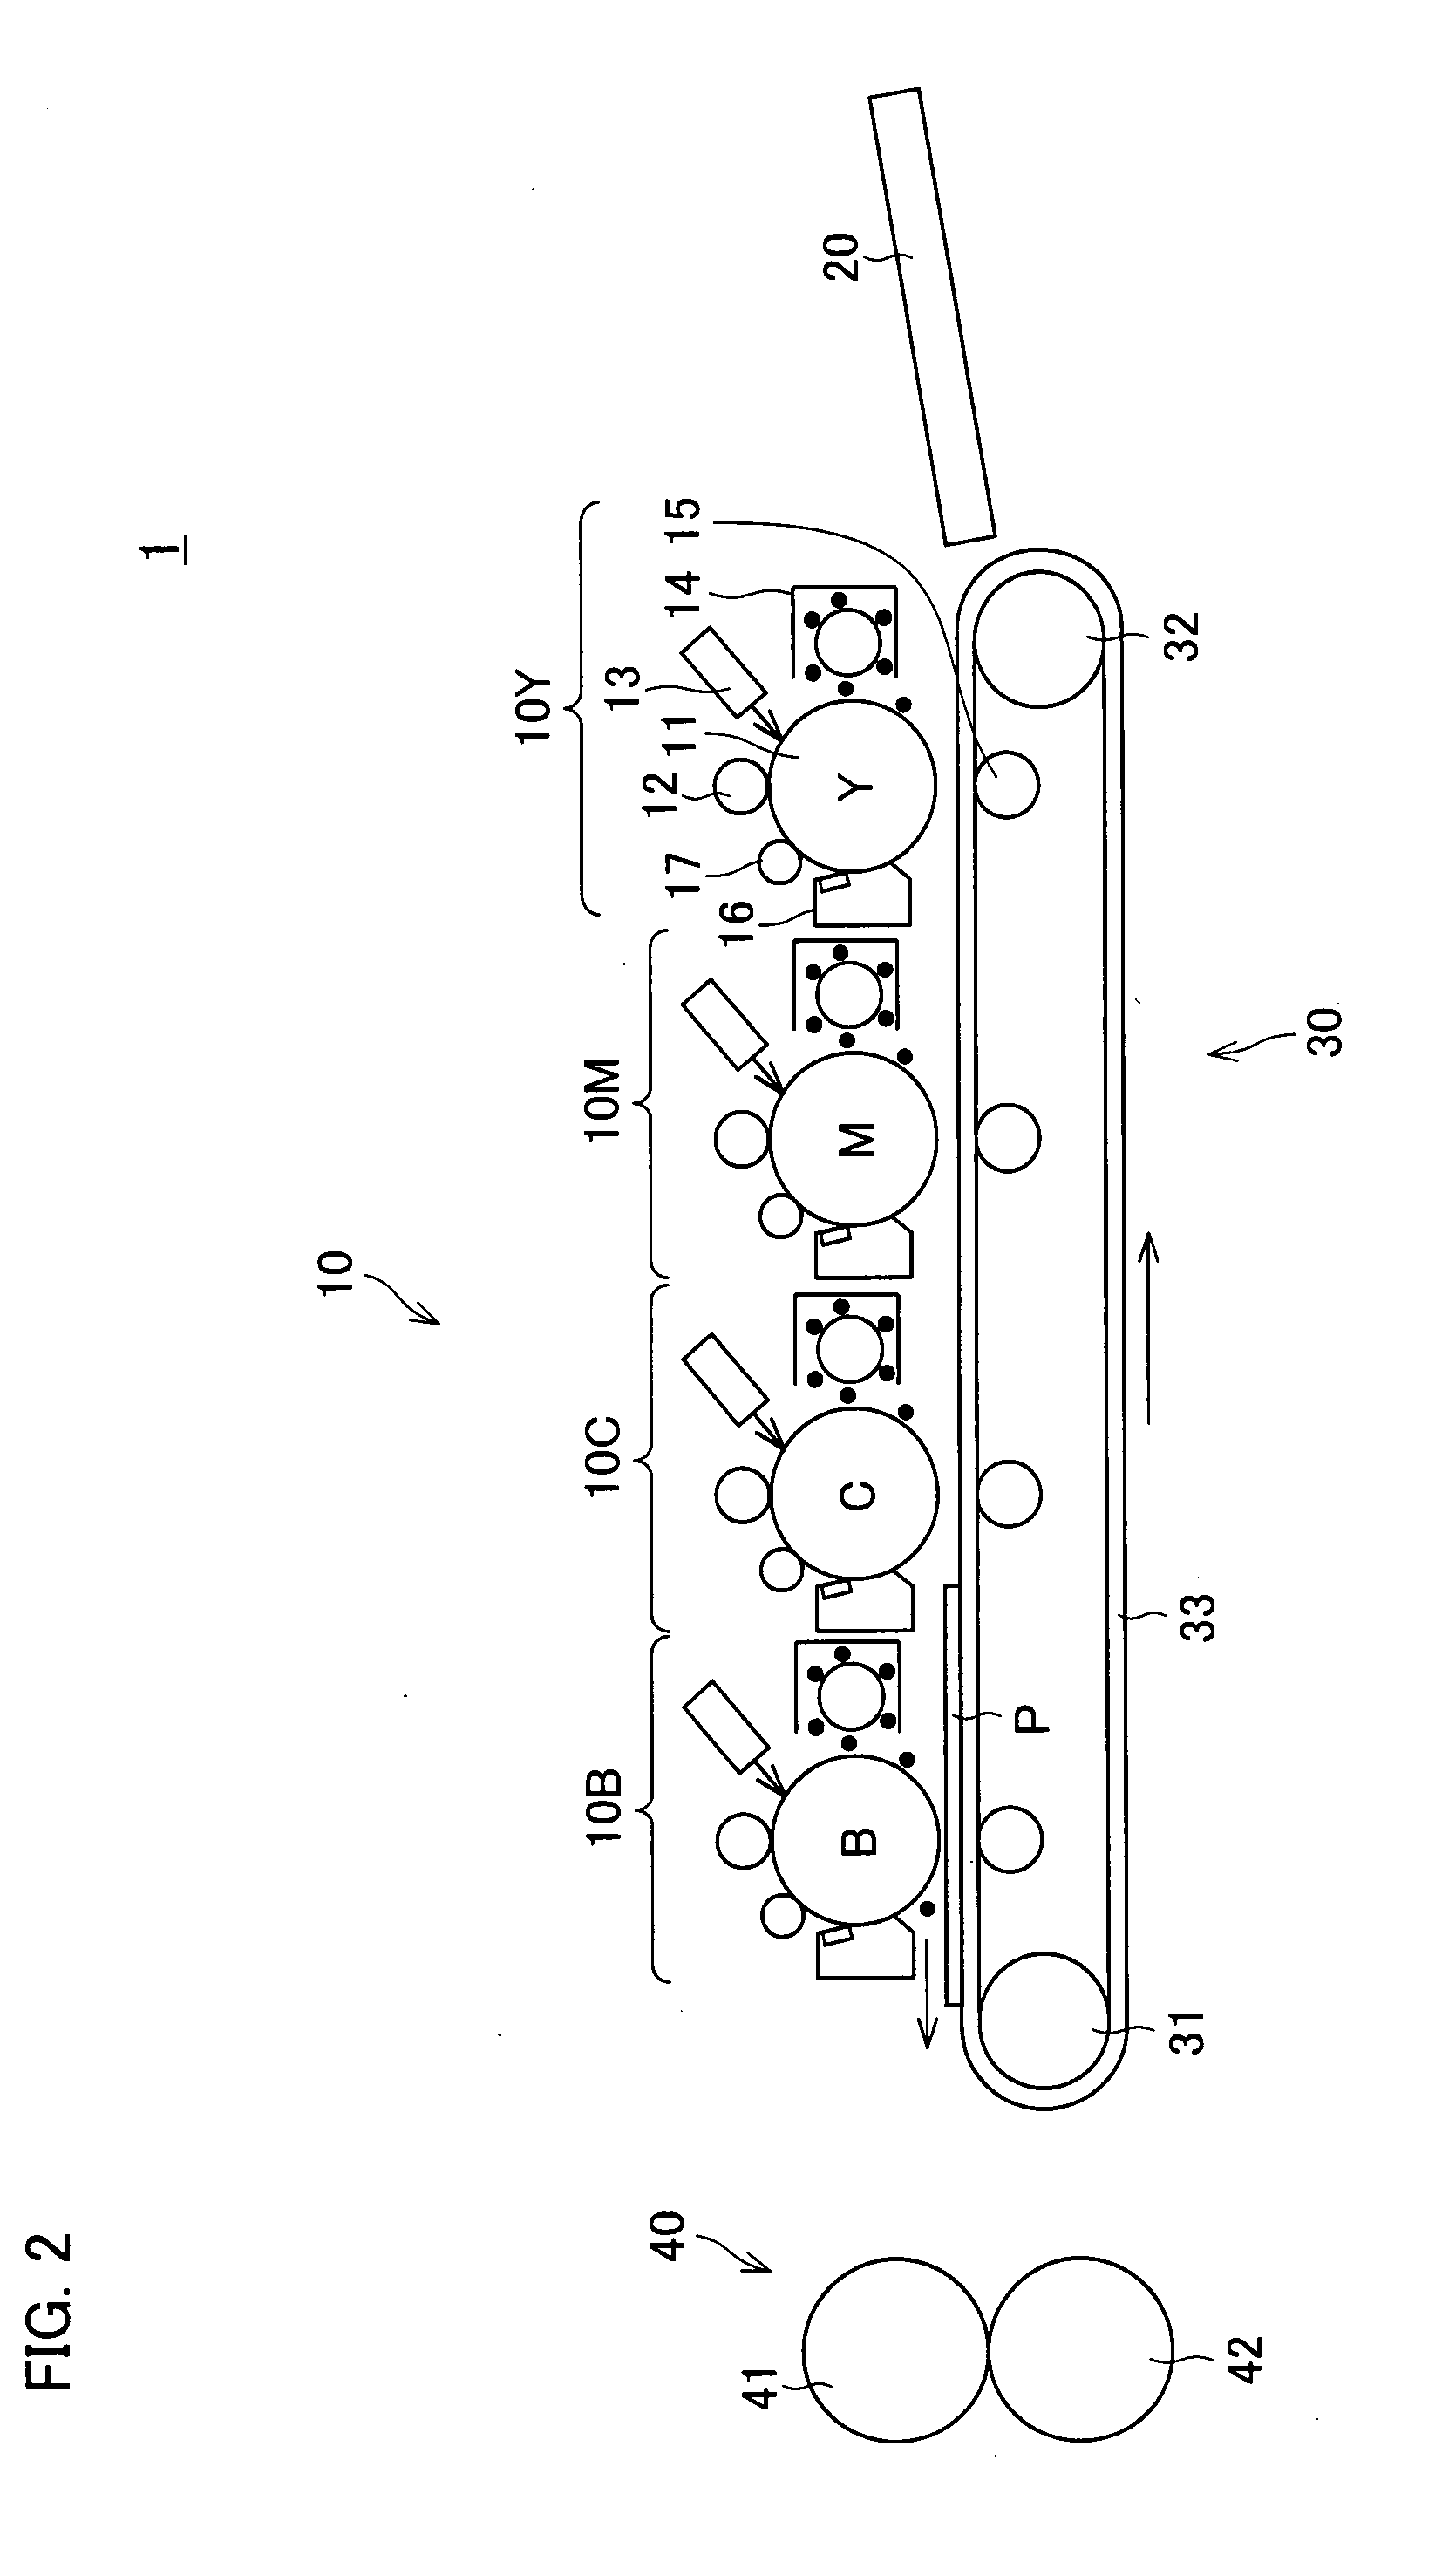 Image forming apparatus, lubricant applying apparatus, control method of image forming apparatus